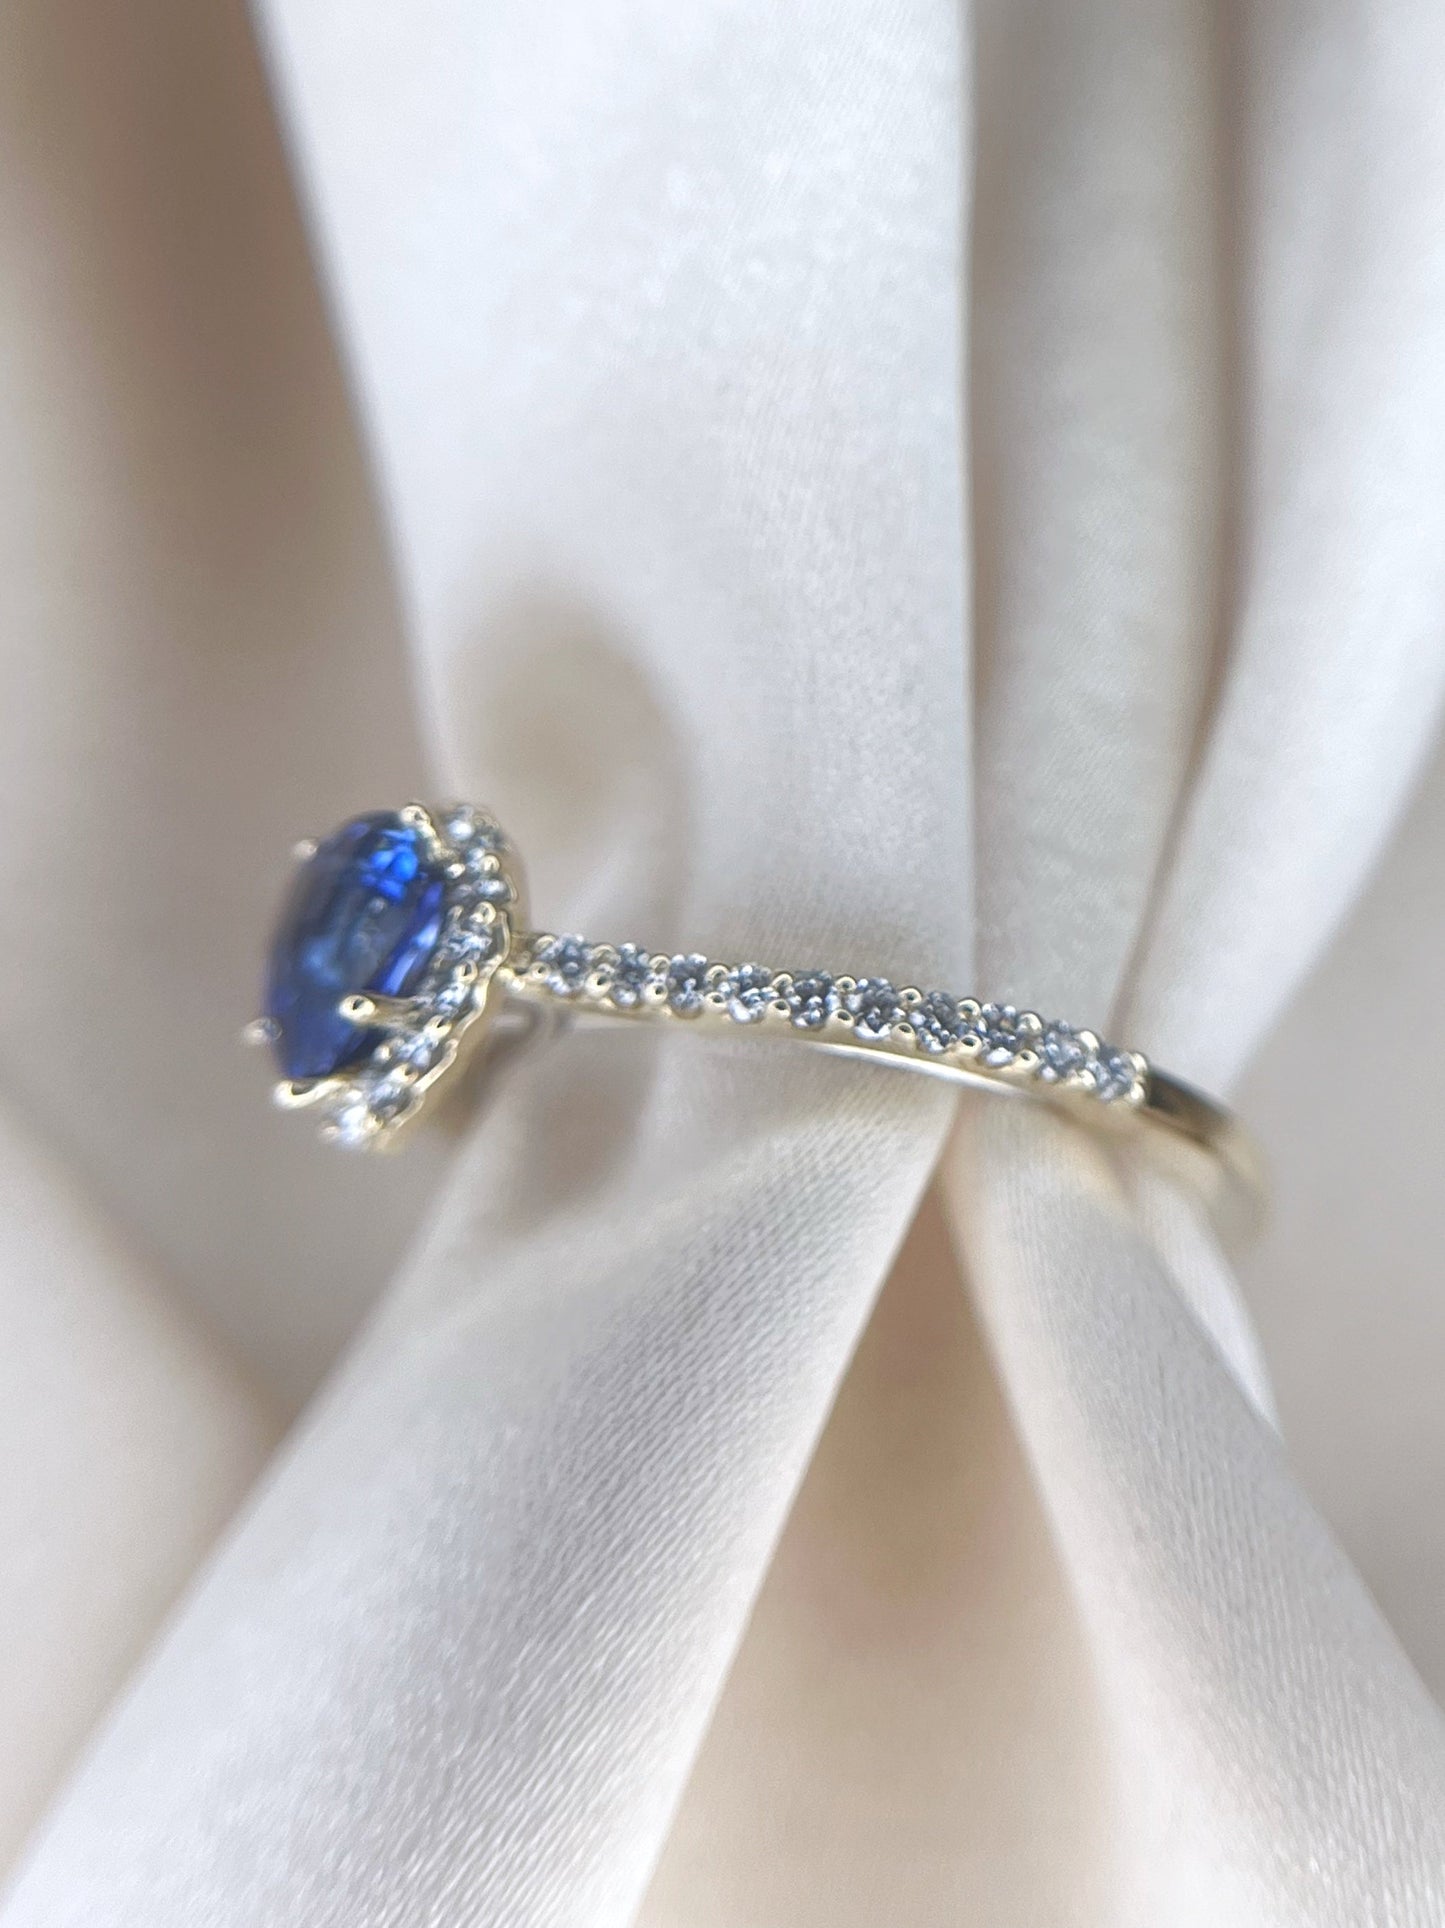 Pear Shaped Blue Sapphire and Diamond Ring